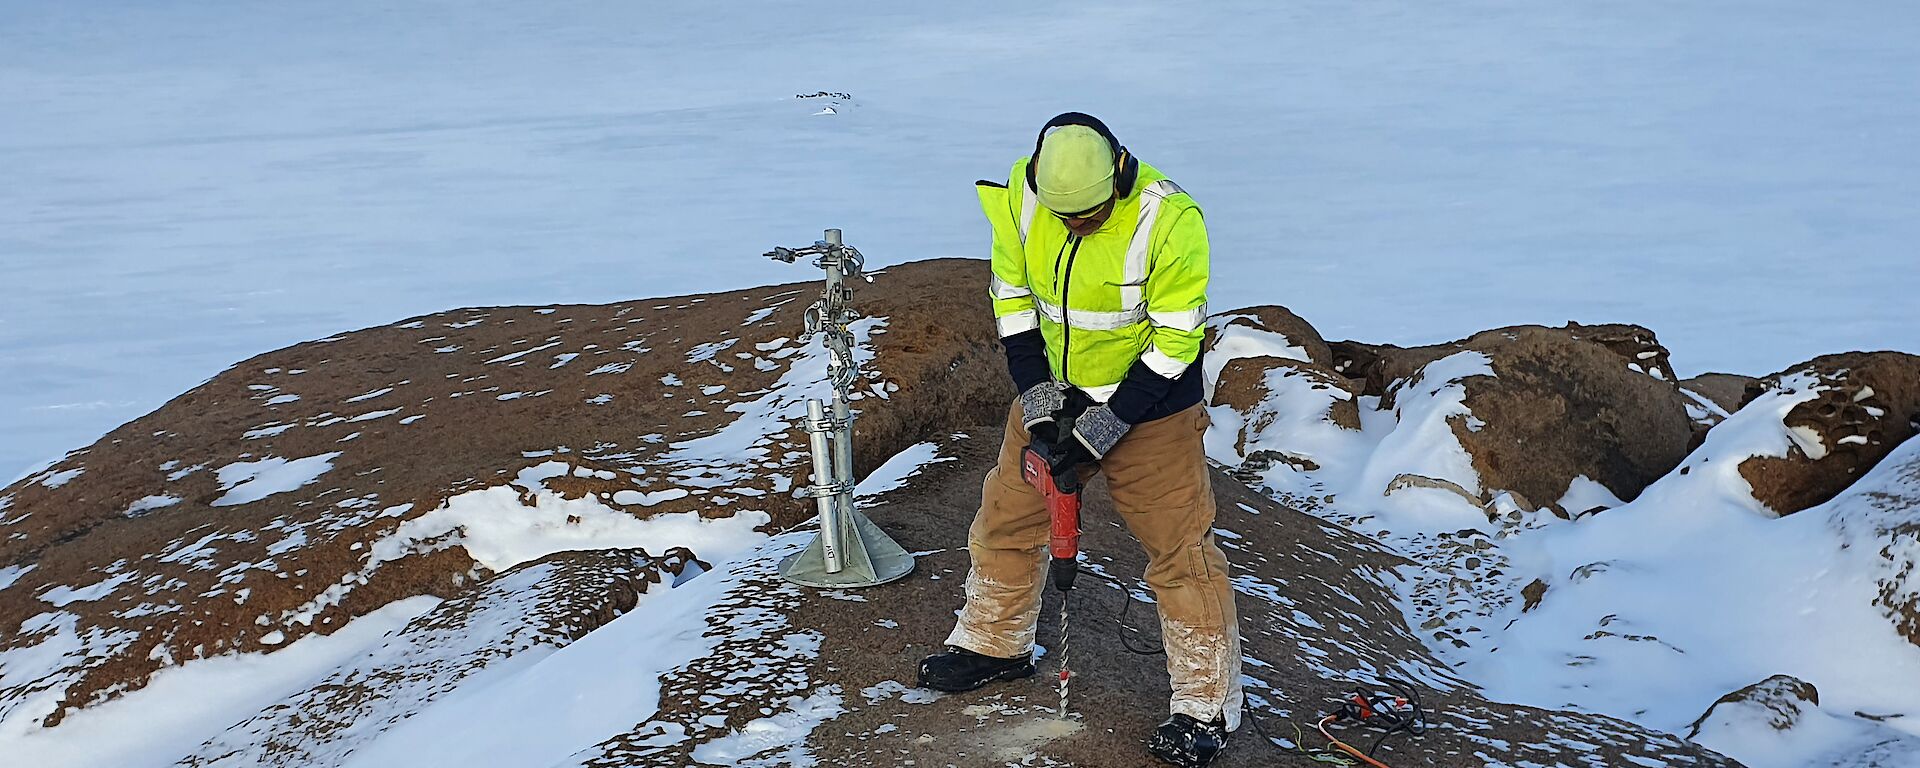 Casey expeditioner drilling a hole in the snow covered rocks for weather instruments